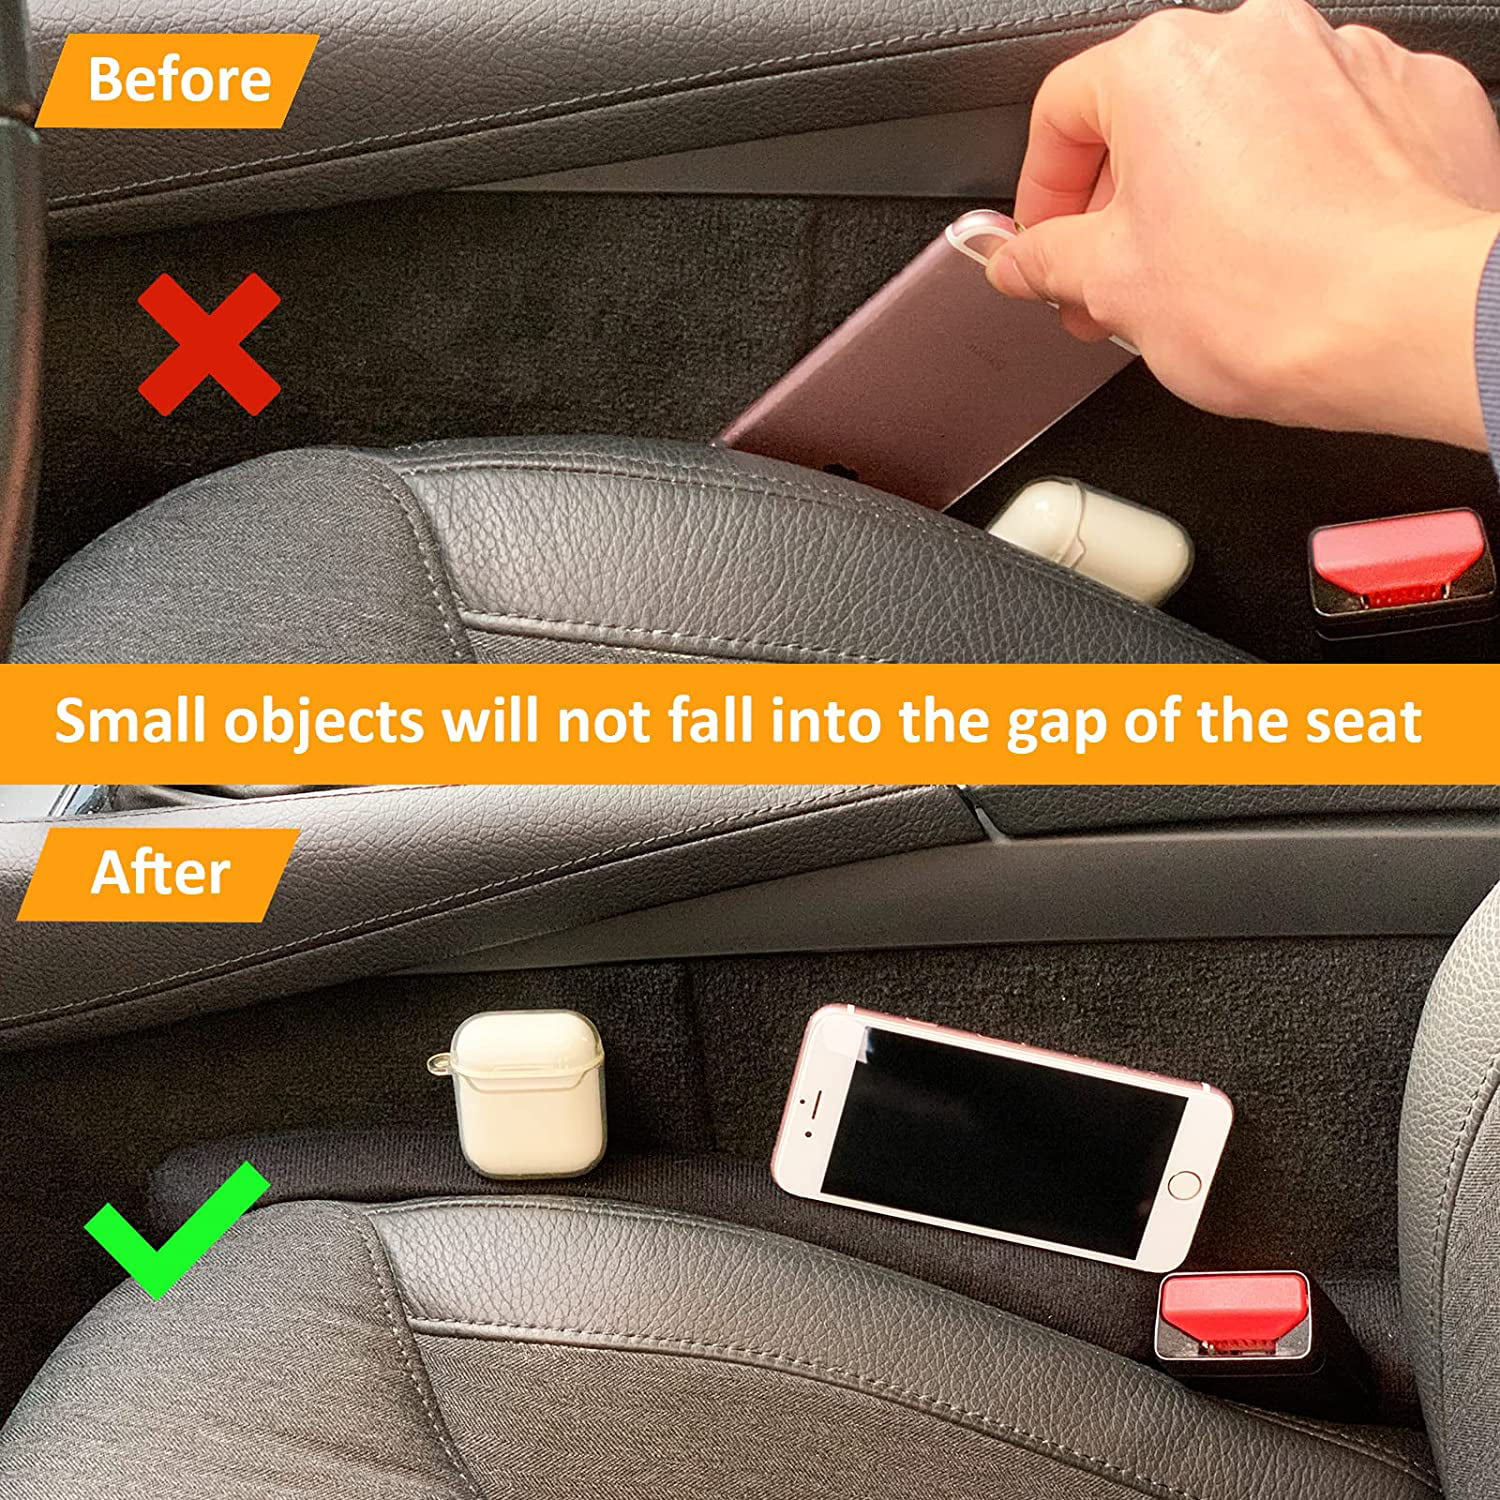 GYTBL Car Seat Gap Filler 2 Pack Universal for Car SUV Truck Fit Organizer,  Fit Organizer Fill The Gap Between Seat and Console Stop Things from